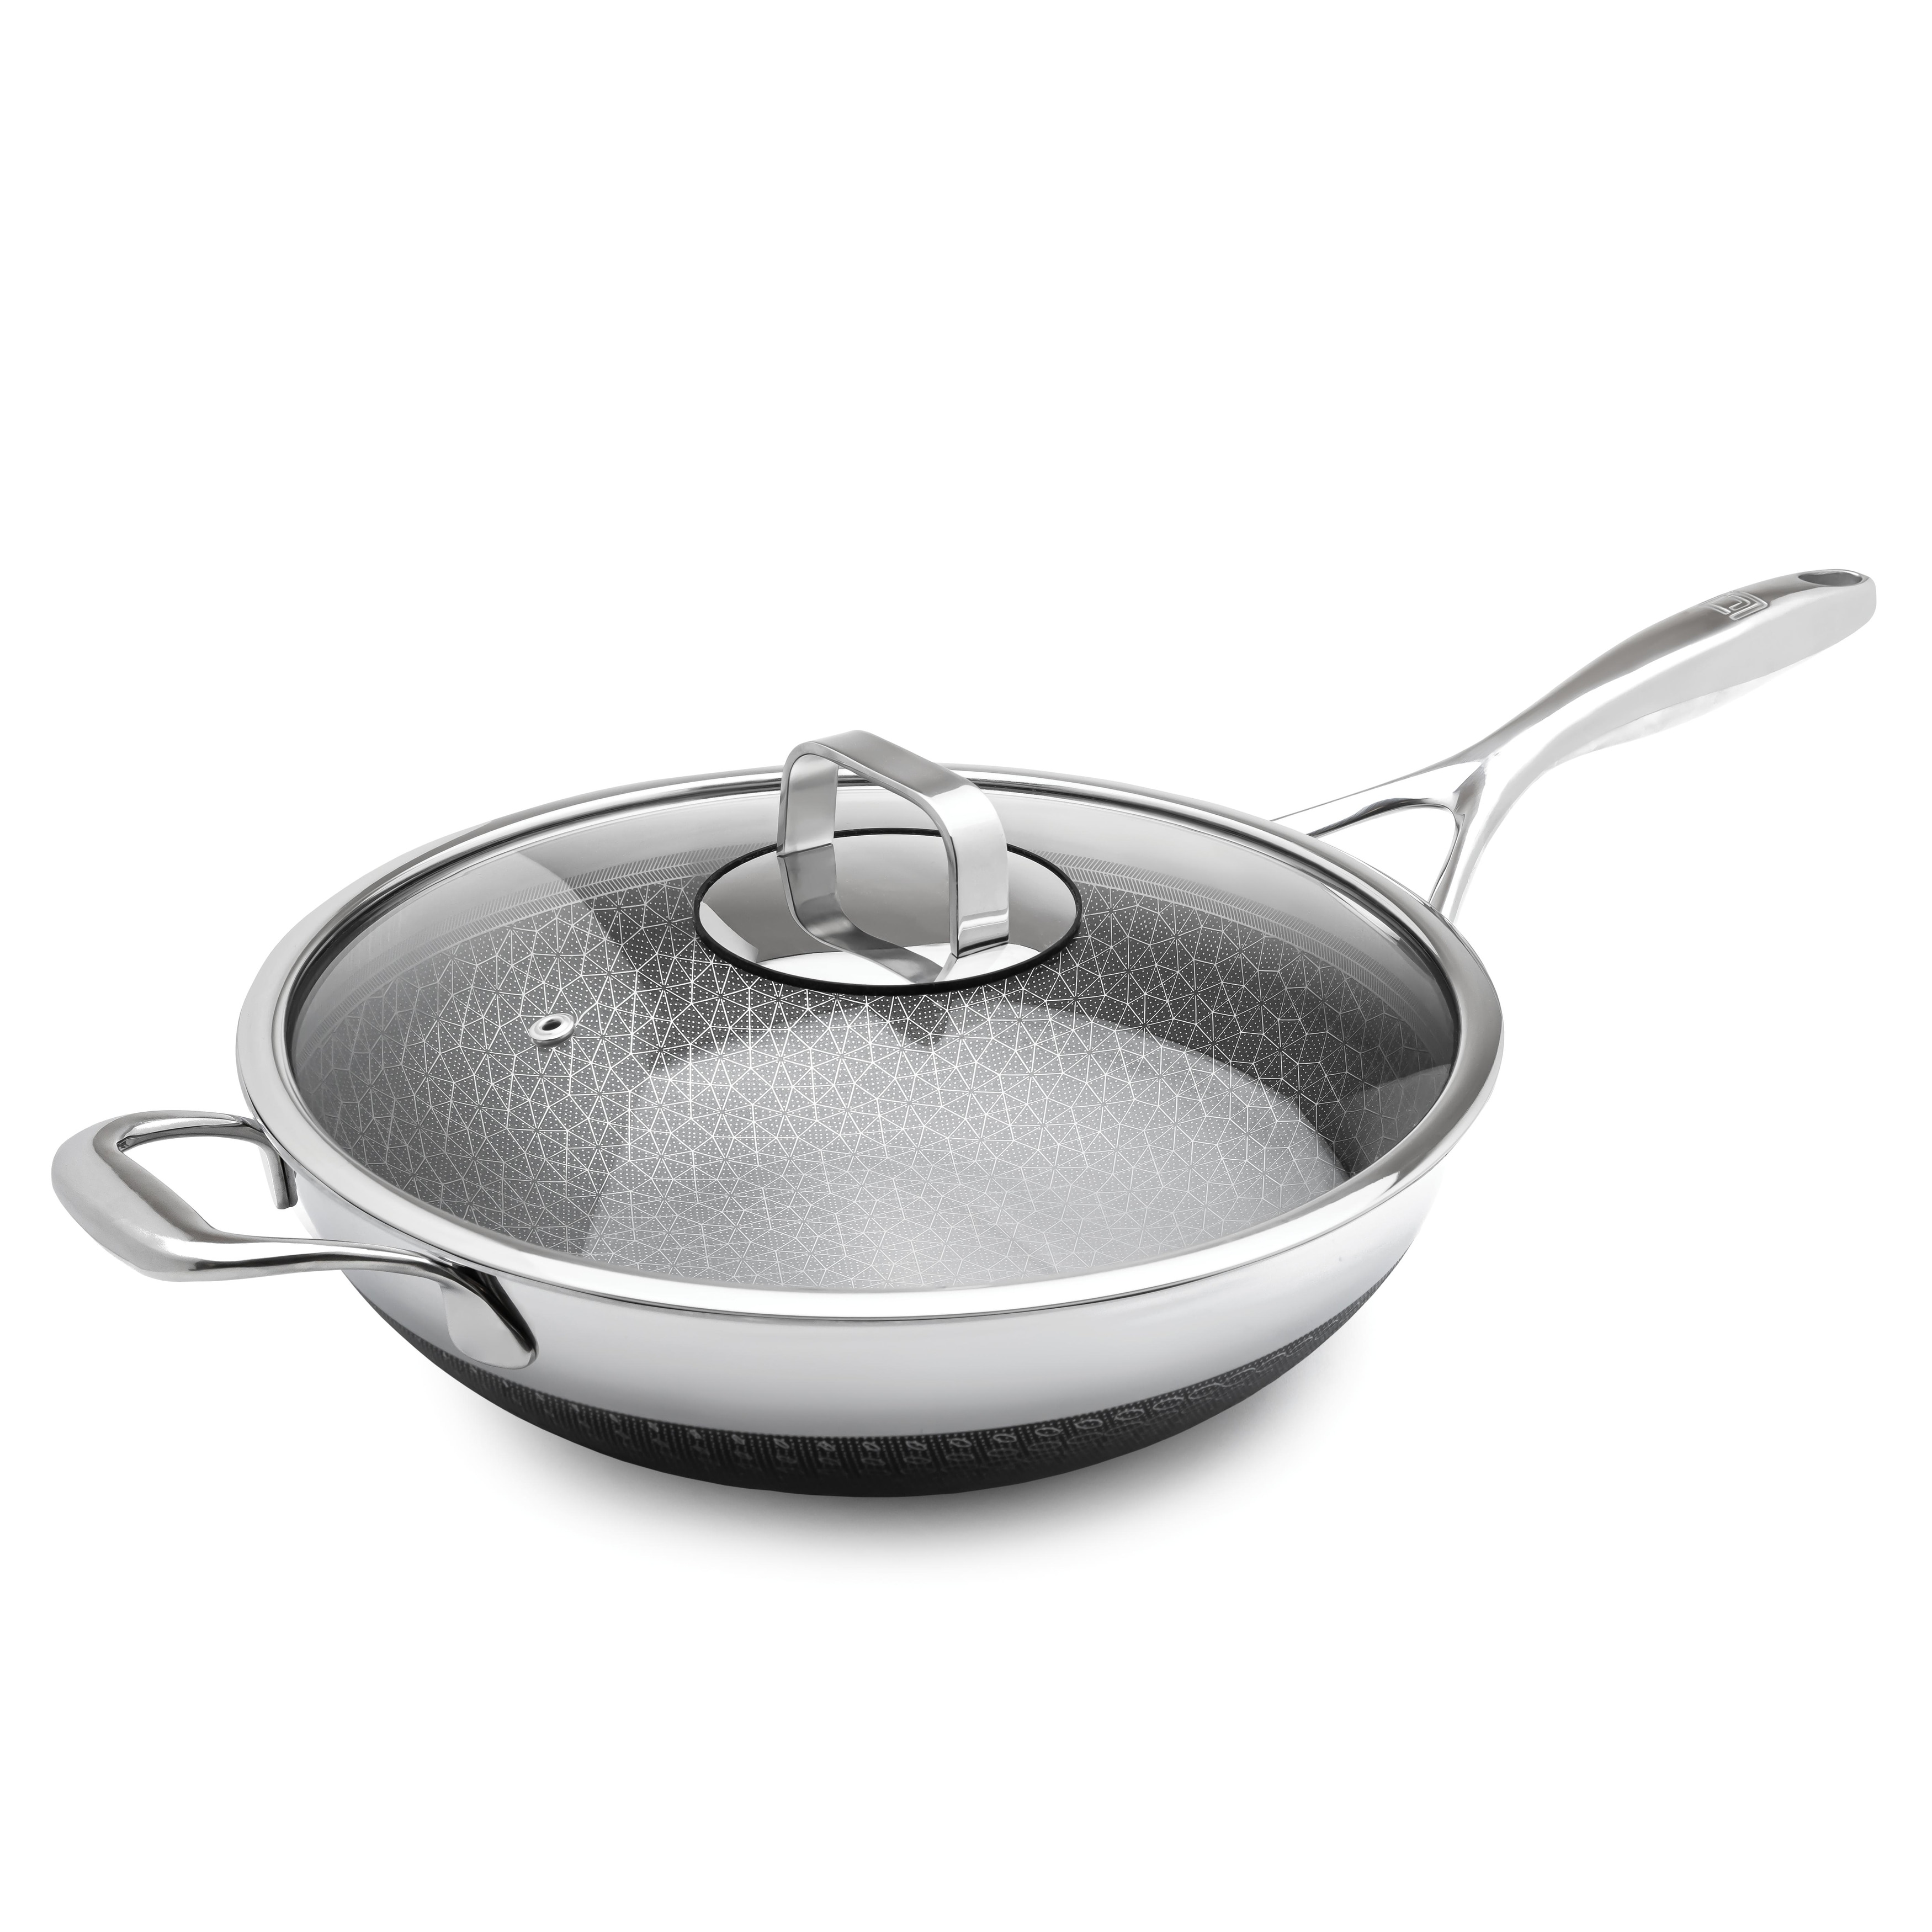 https://ak1.ostkcdn.com/images/products/is/images/direct/fa817ee6b852e004a560837fe3e4c01b6adb3031/DiamondClad-by-Livwell-12%22-Hybrid-Nonstick-Wok-Set-with-Tempered-Glass-Lid%2C-Dishwasher-Safe%2C-Cool-Touch-Handle%2C-PFOA-free.jpg